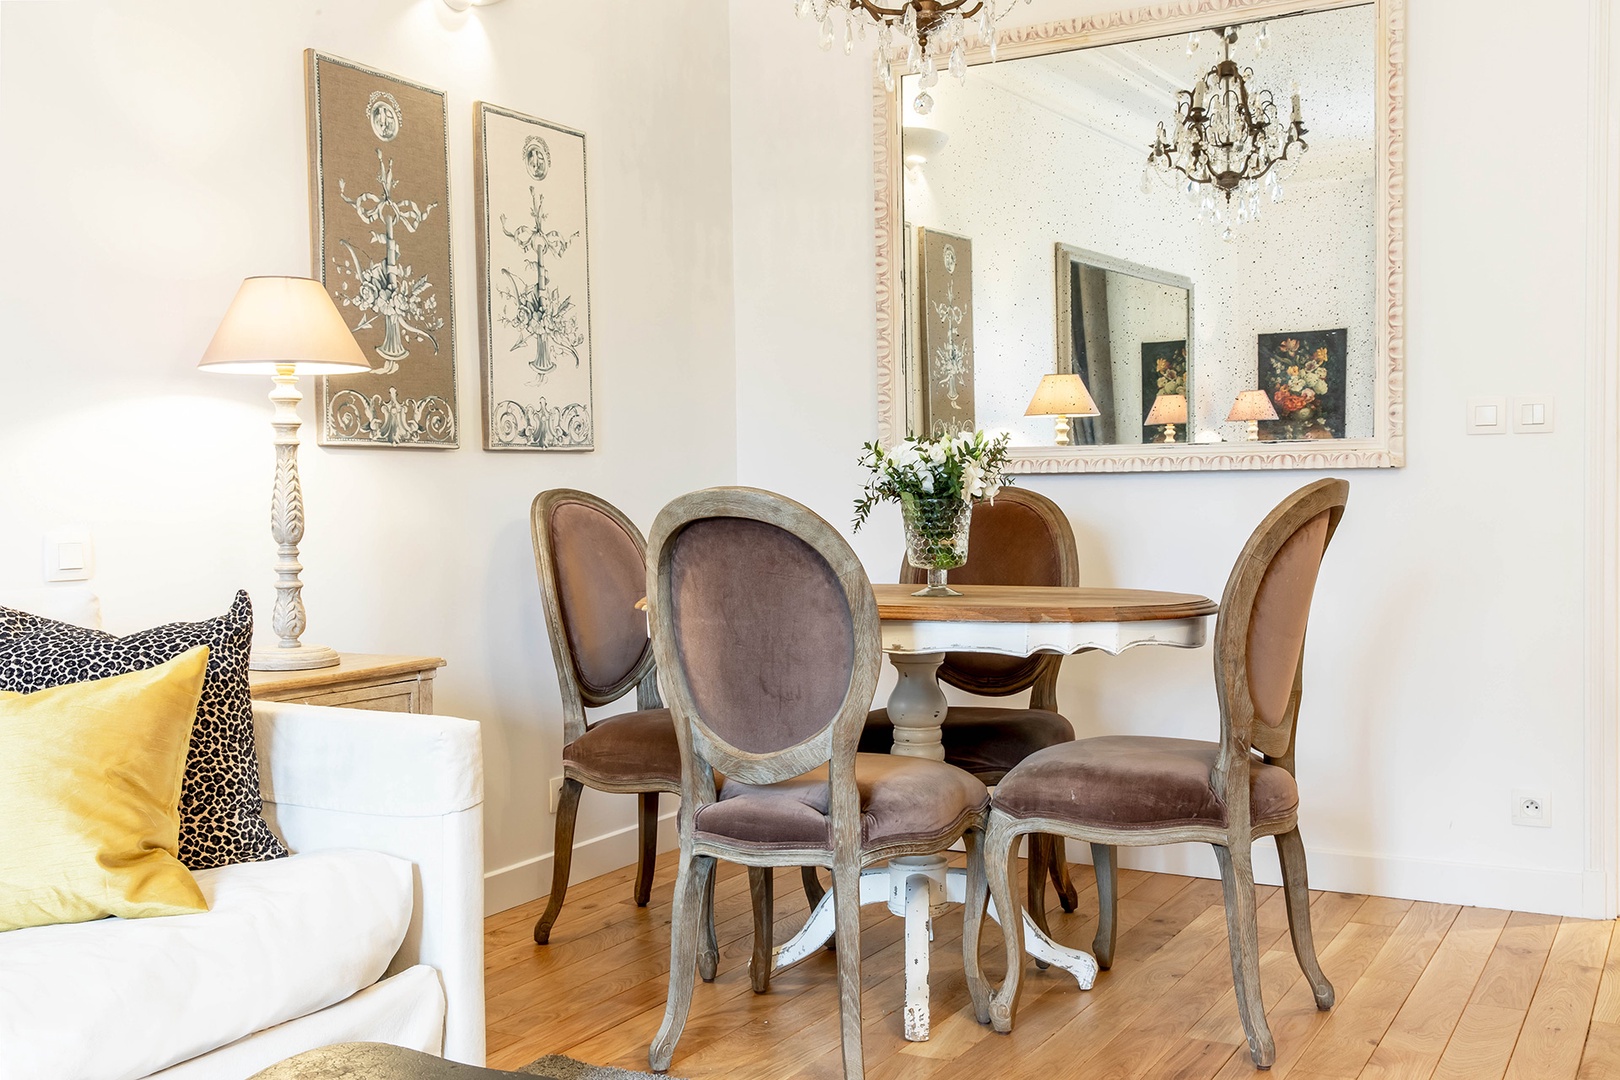 Enjoy French meals in the elegant dining area.